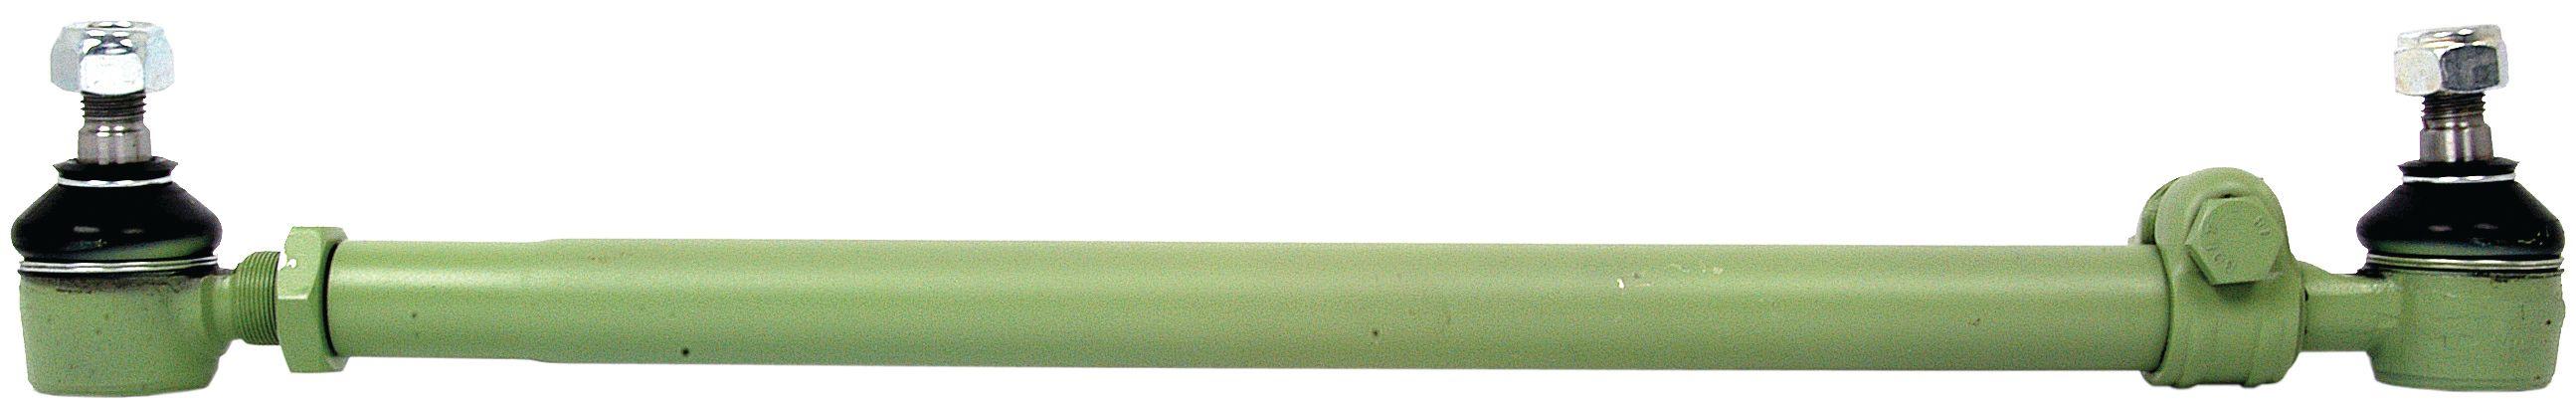 LONG TRACTOR TIE ROD ASSEMBLY 63179